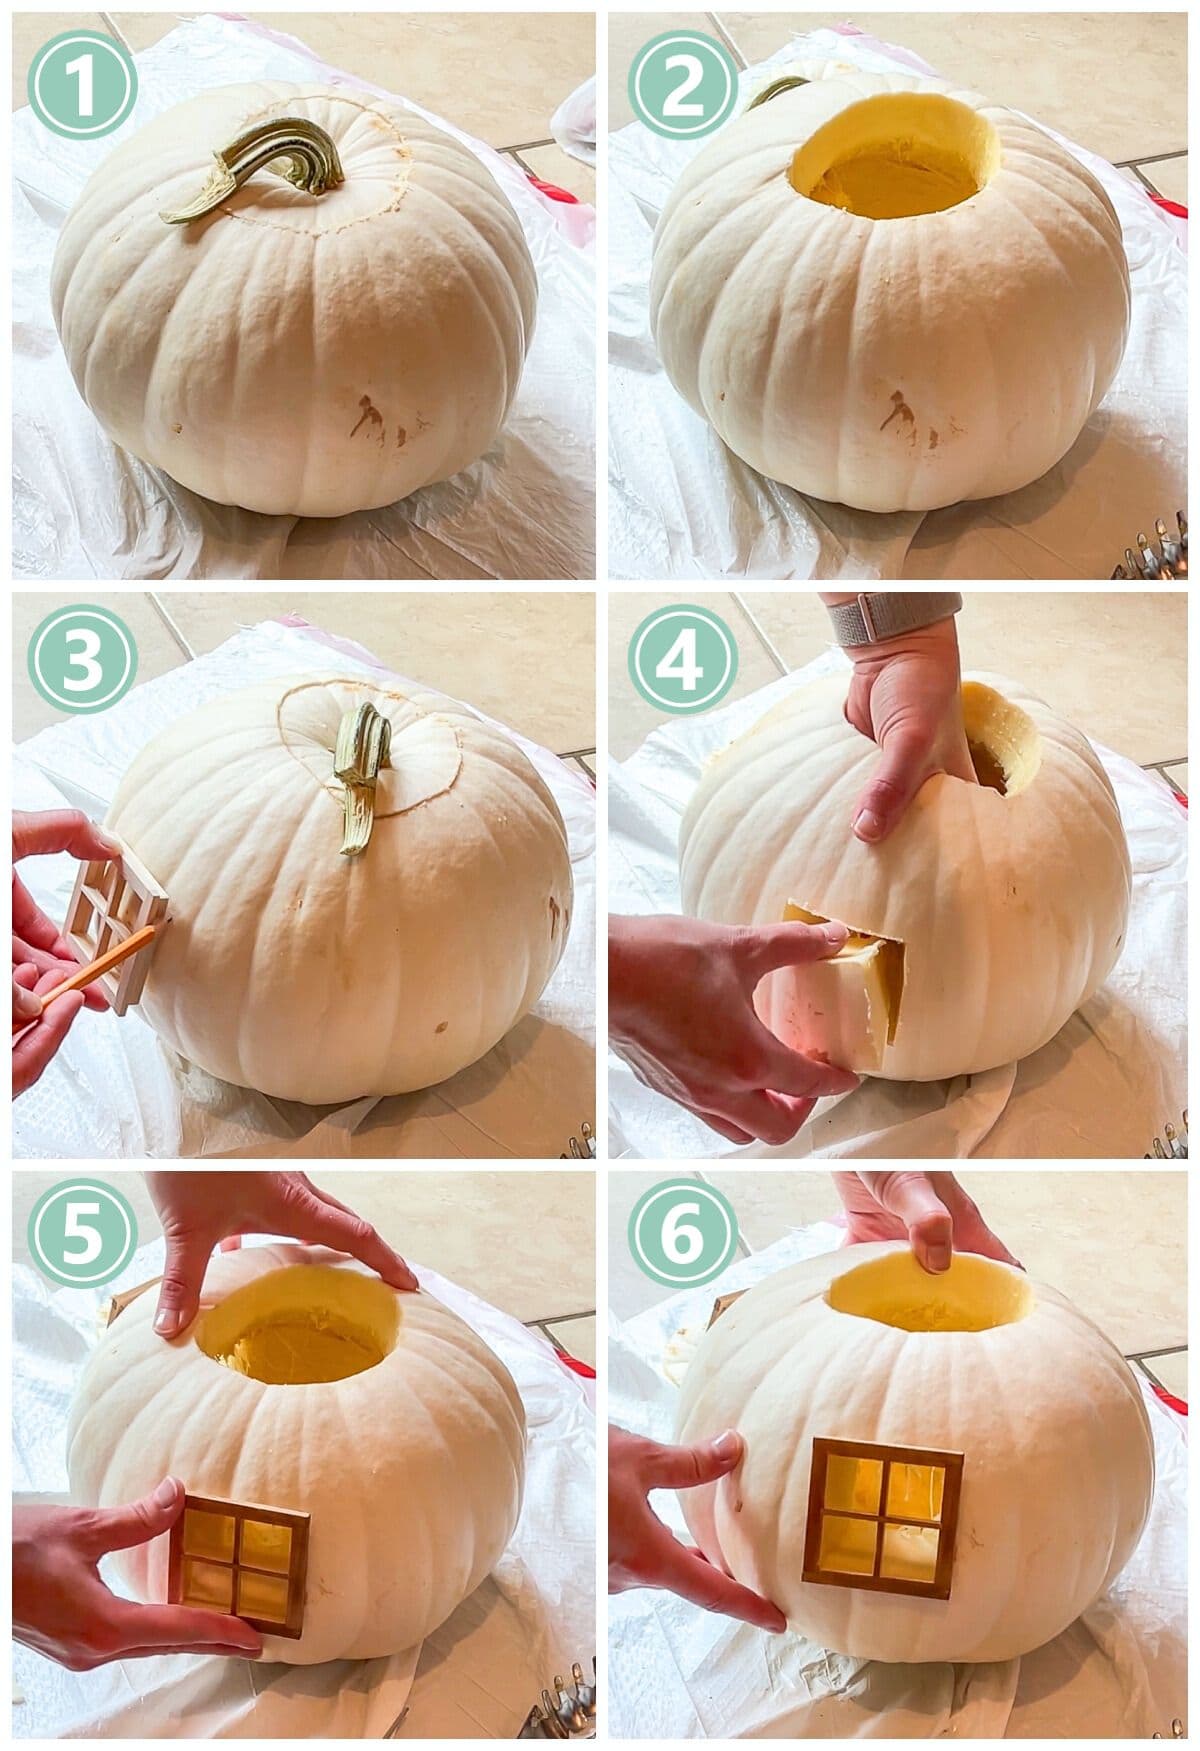 photo collage showing how to make a pumpkin fairy house.